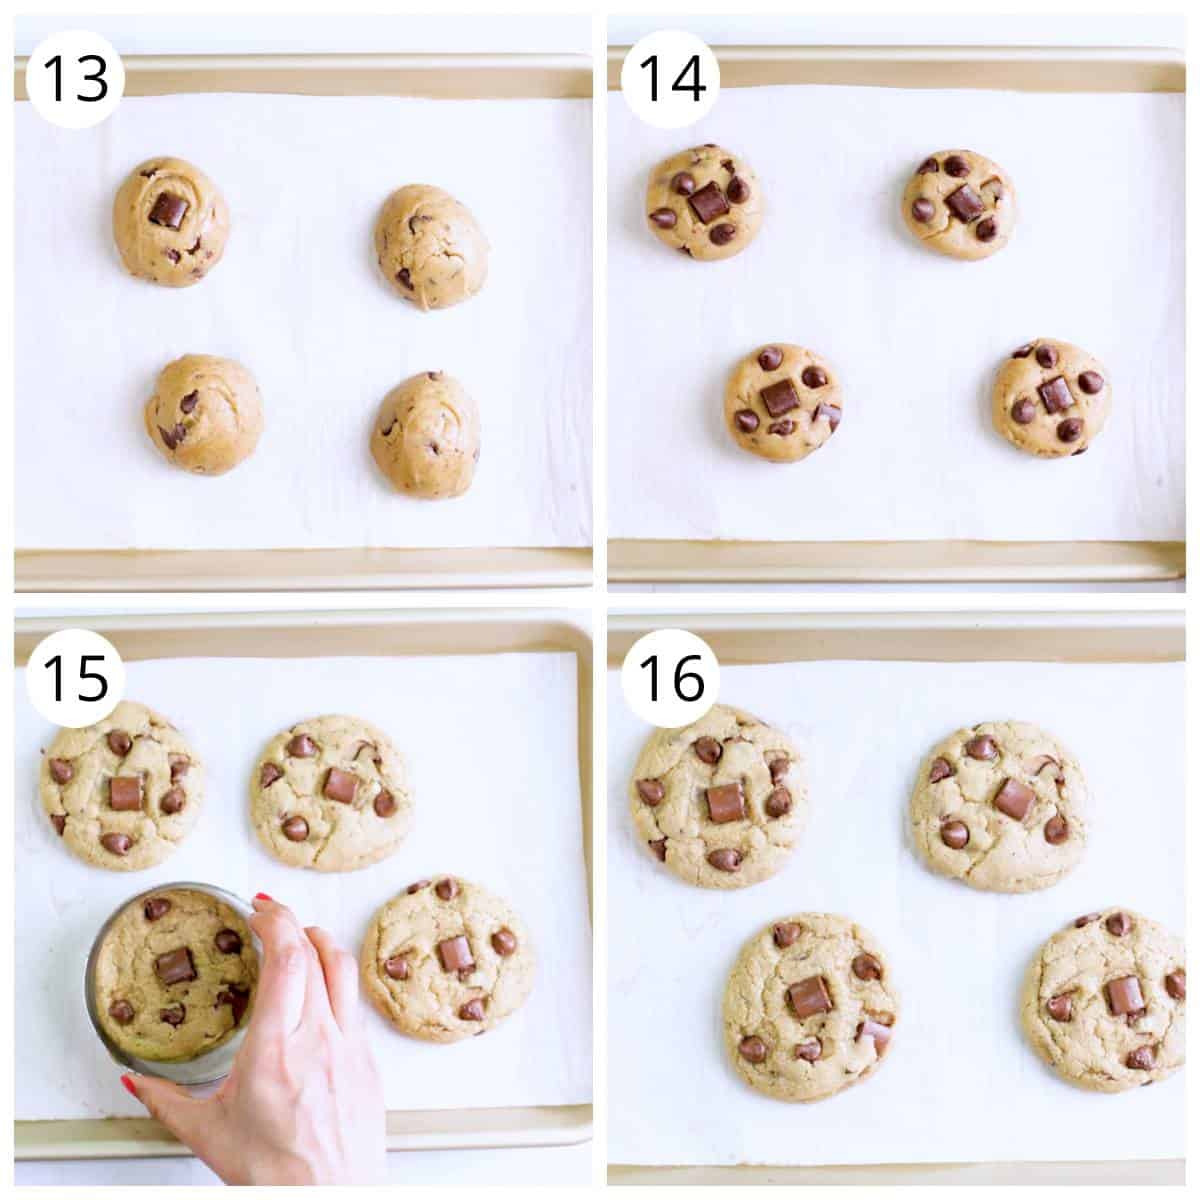 Baking eggless chocolate chip cookies